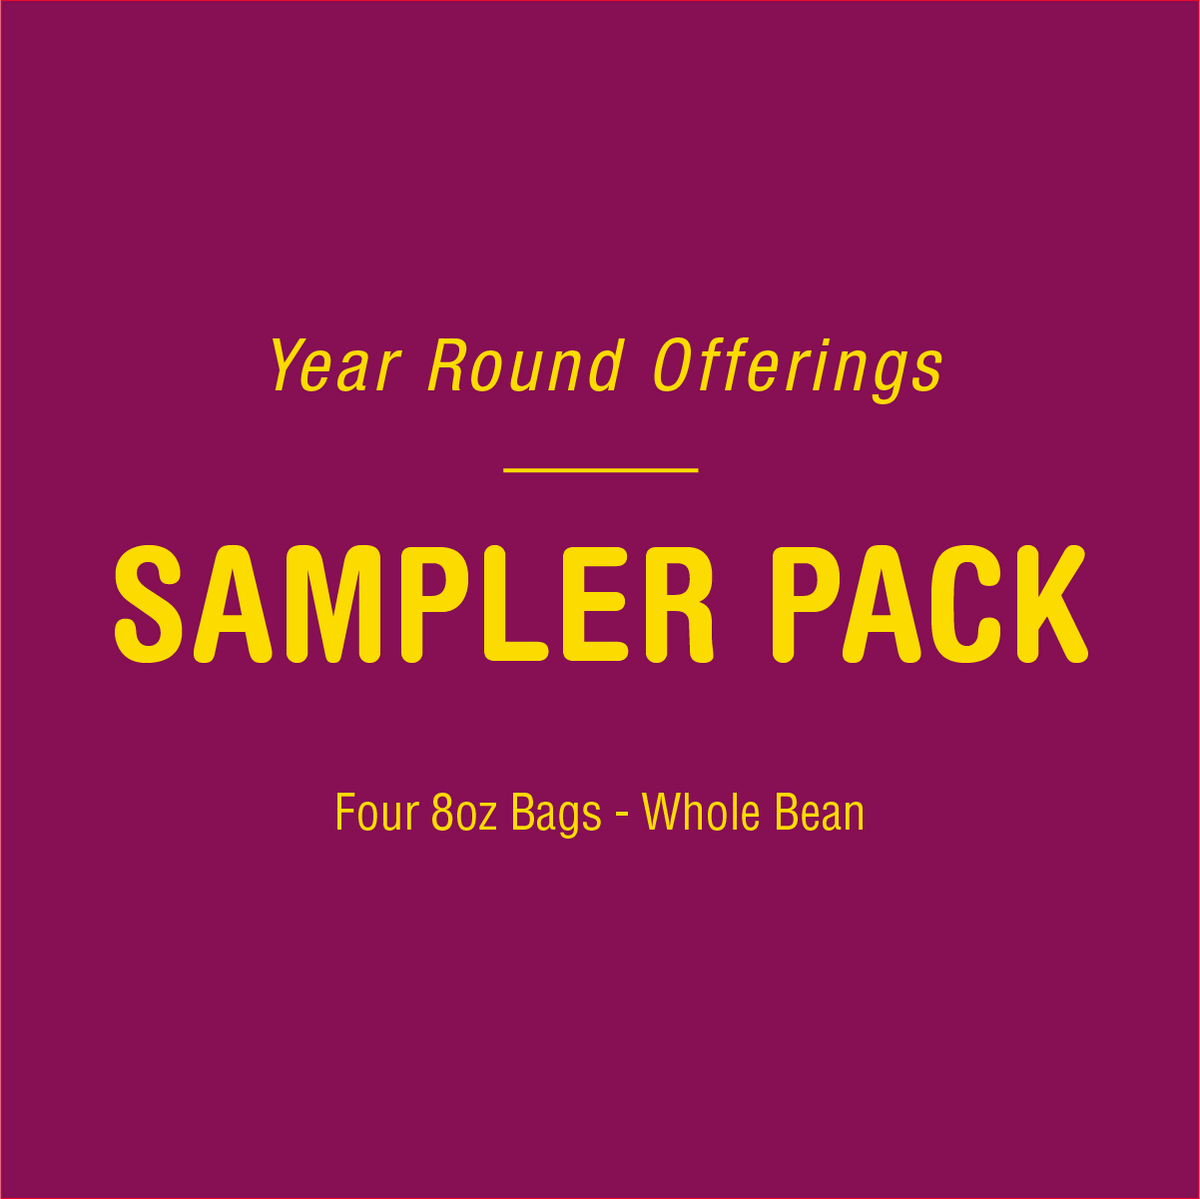 Year Round Offerings Sampler Pack